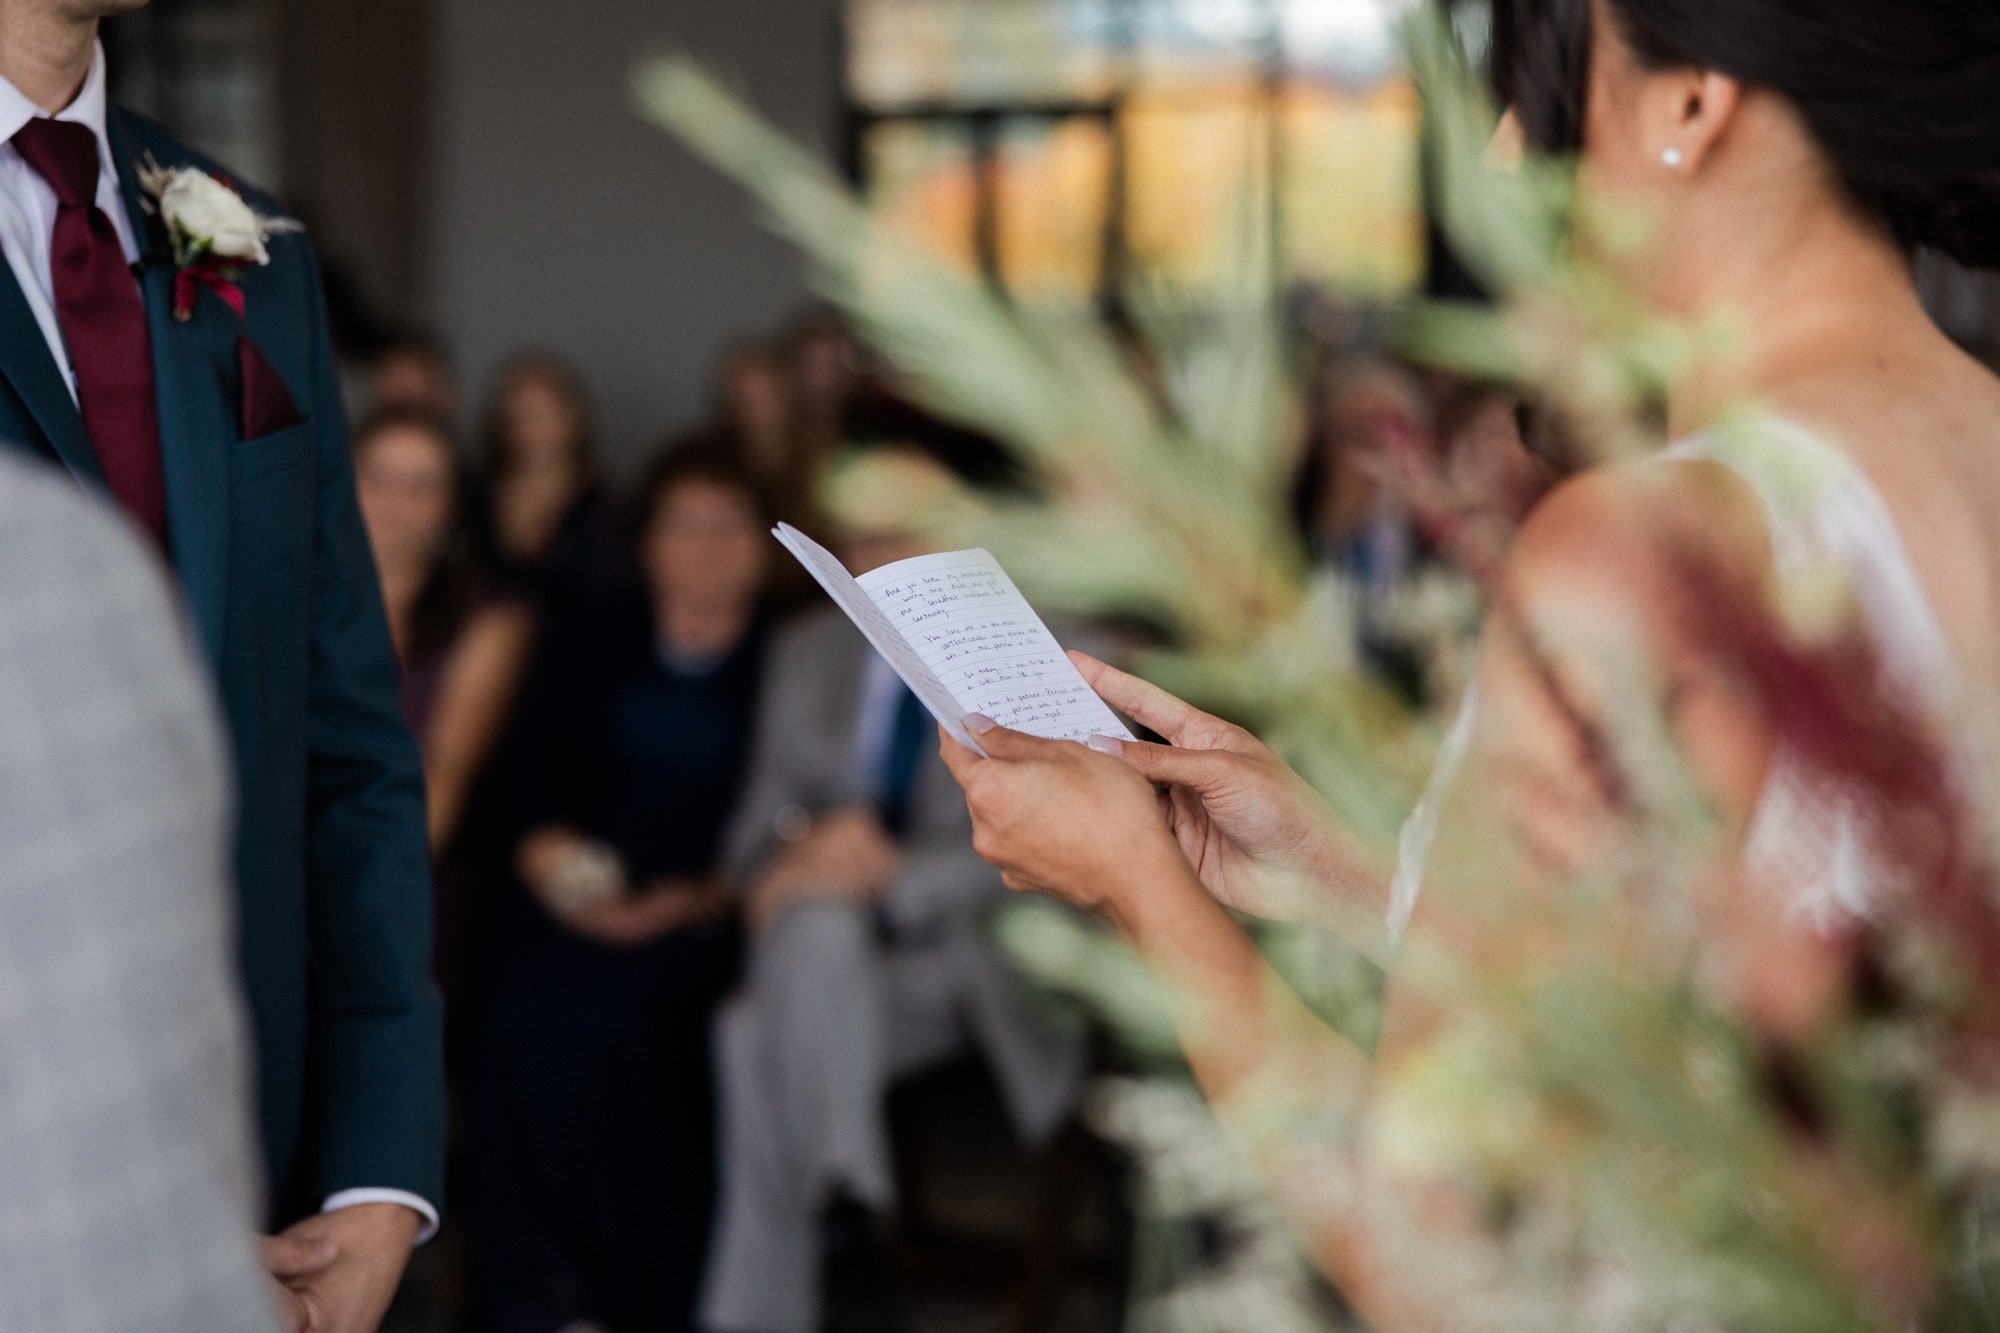 brides hands hold vow book during wedding ceremony at ironlight wedding venue in lake oswego, oregon